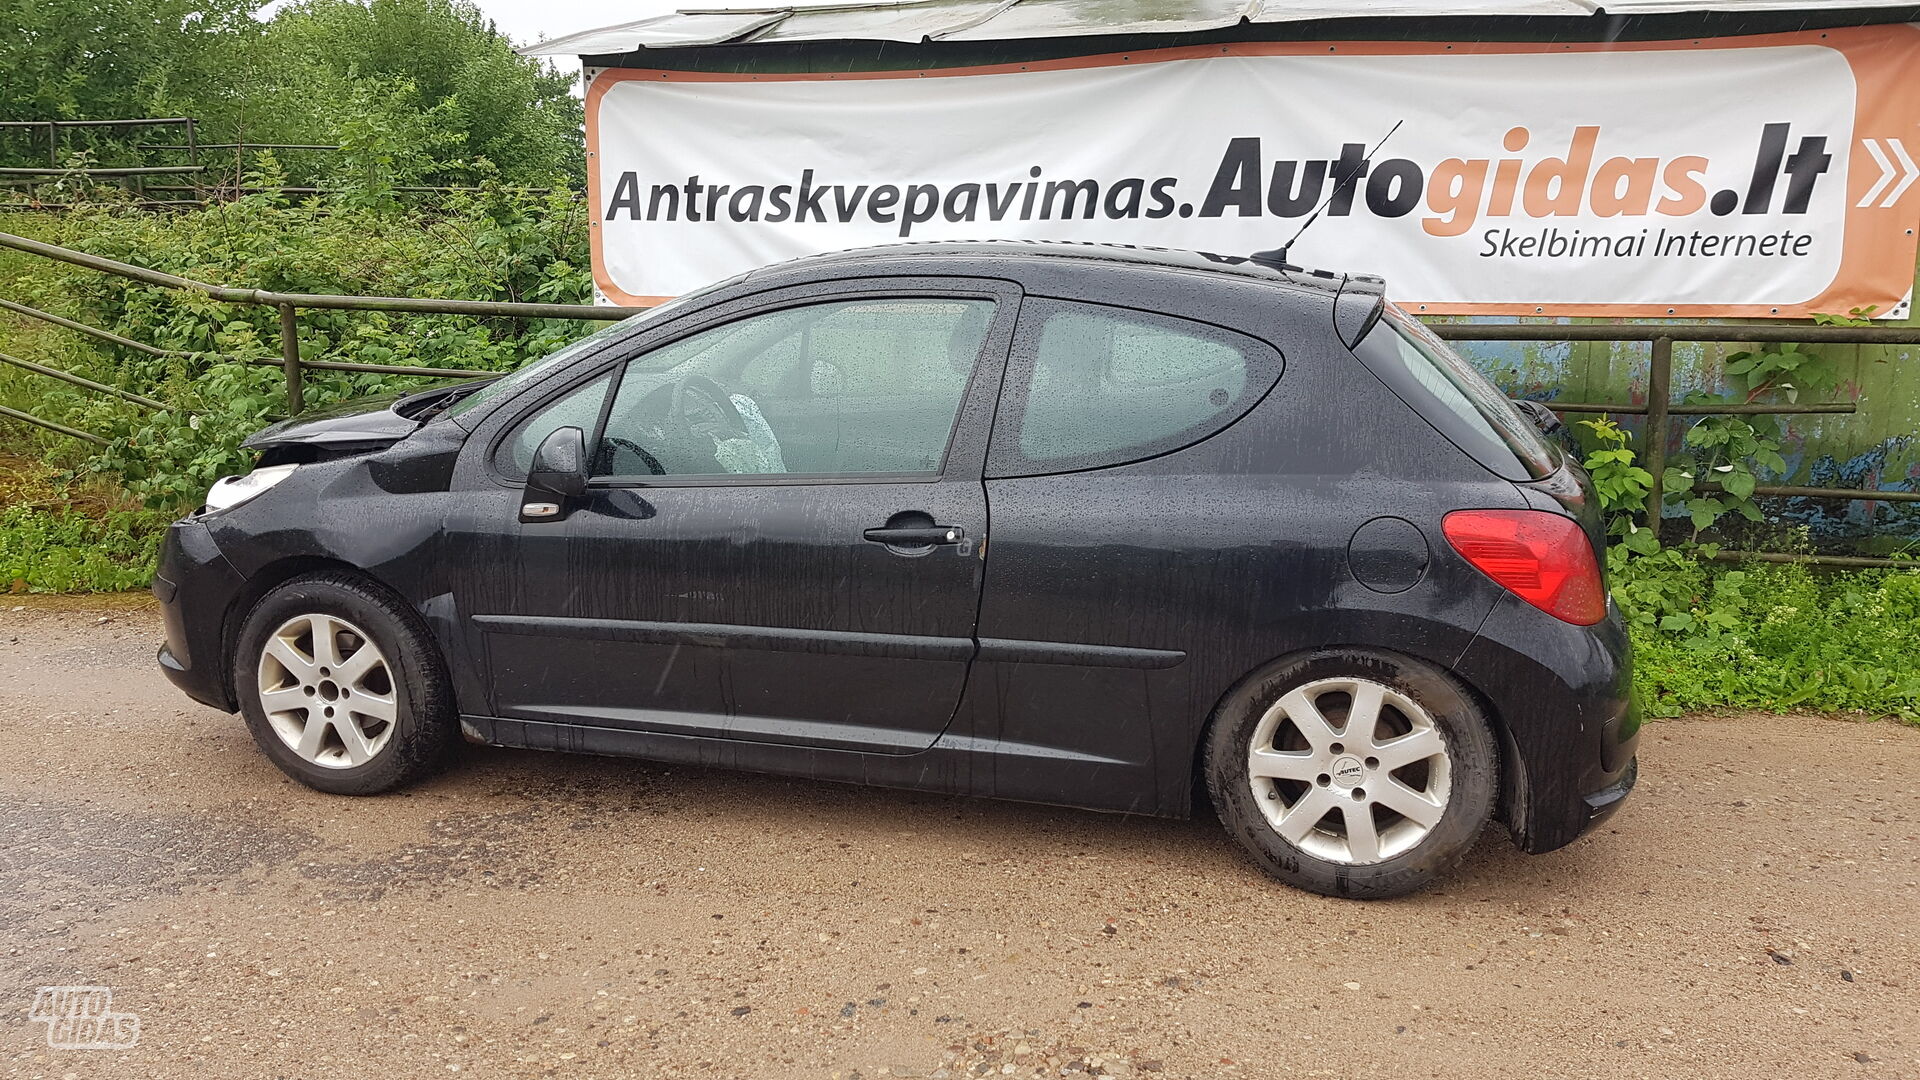 Peugeot 207 1,4HDI Europa 2008 y parts